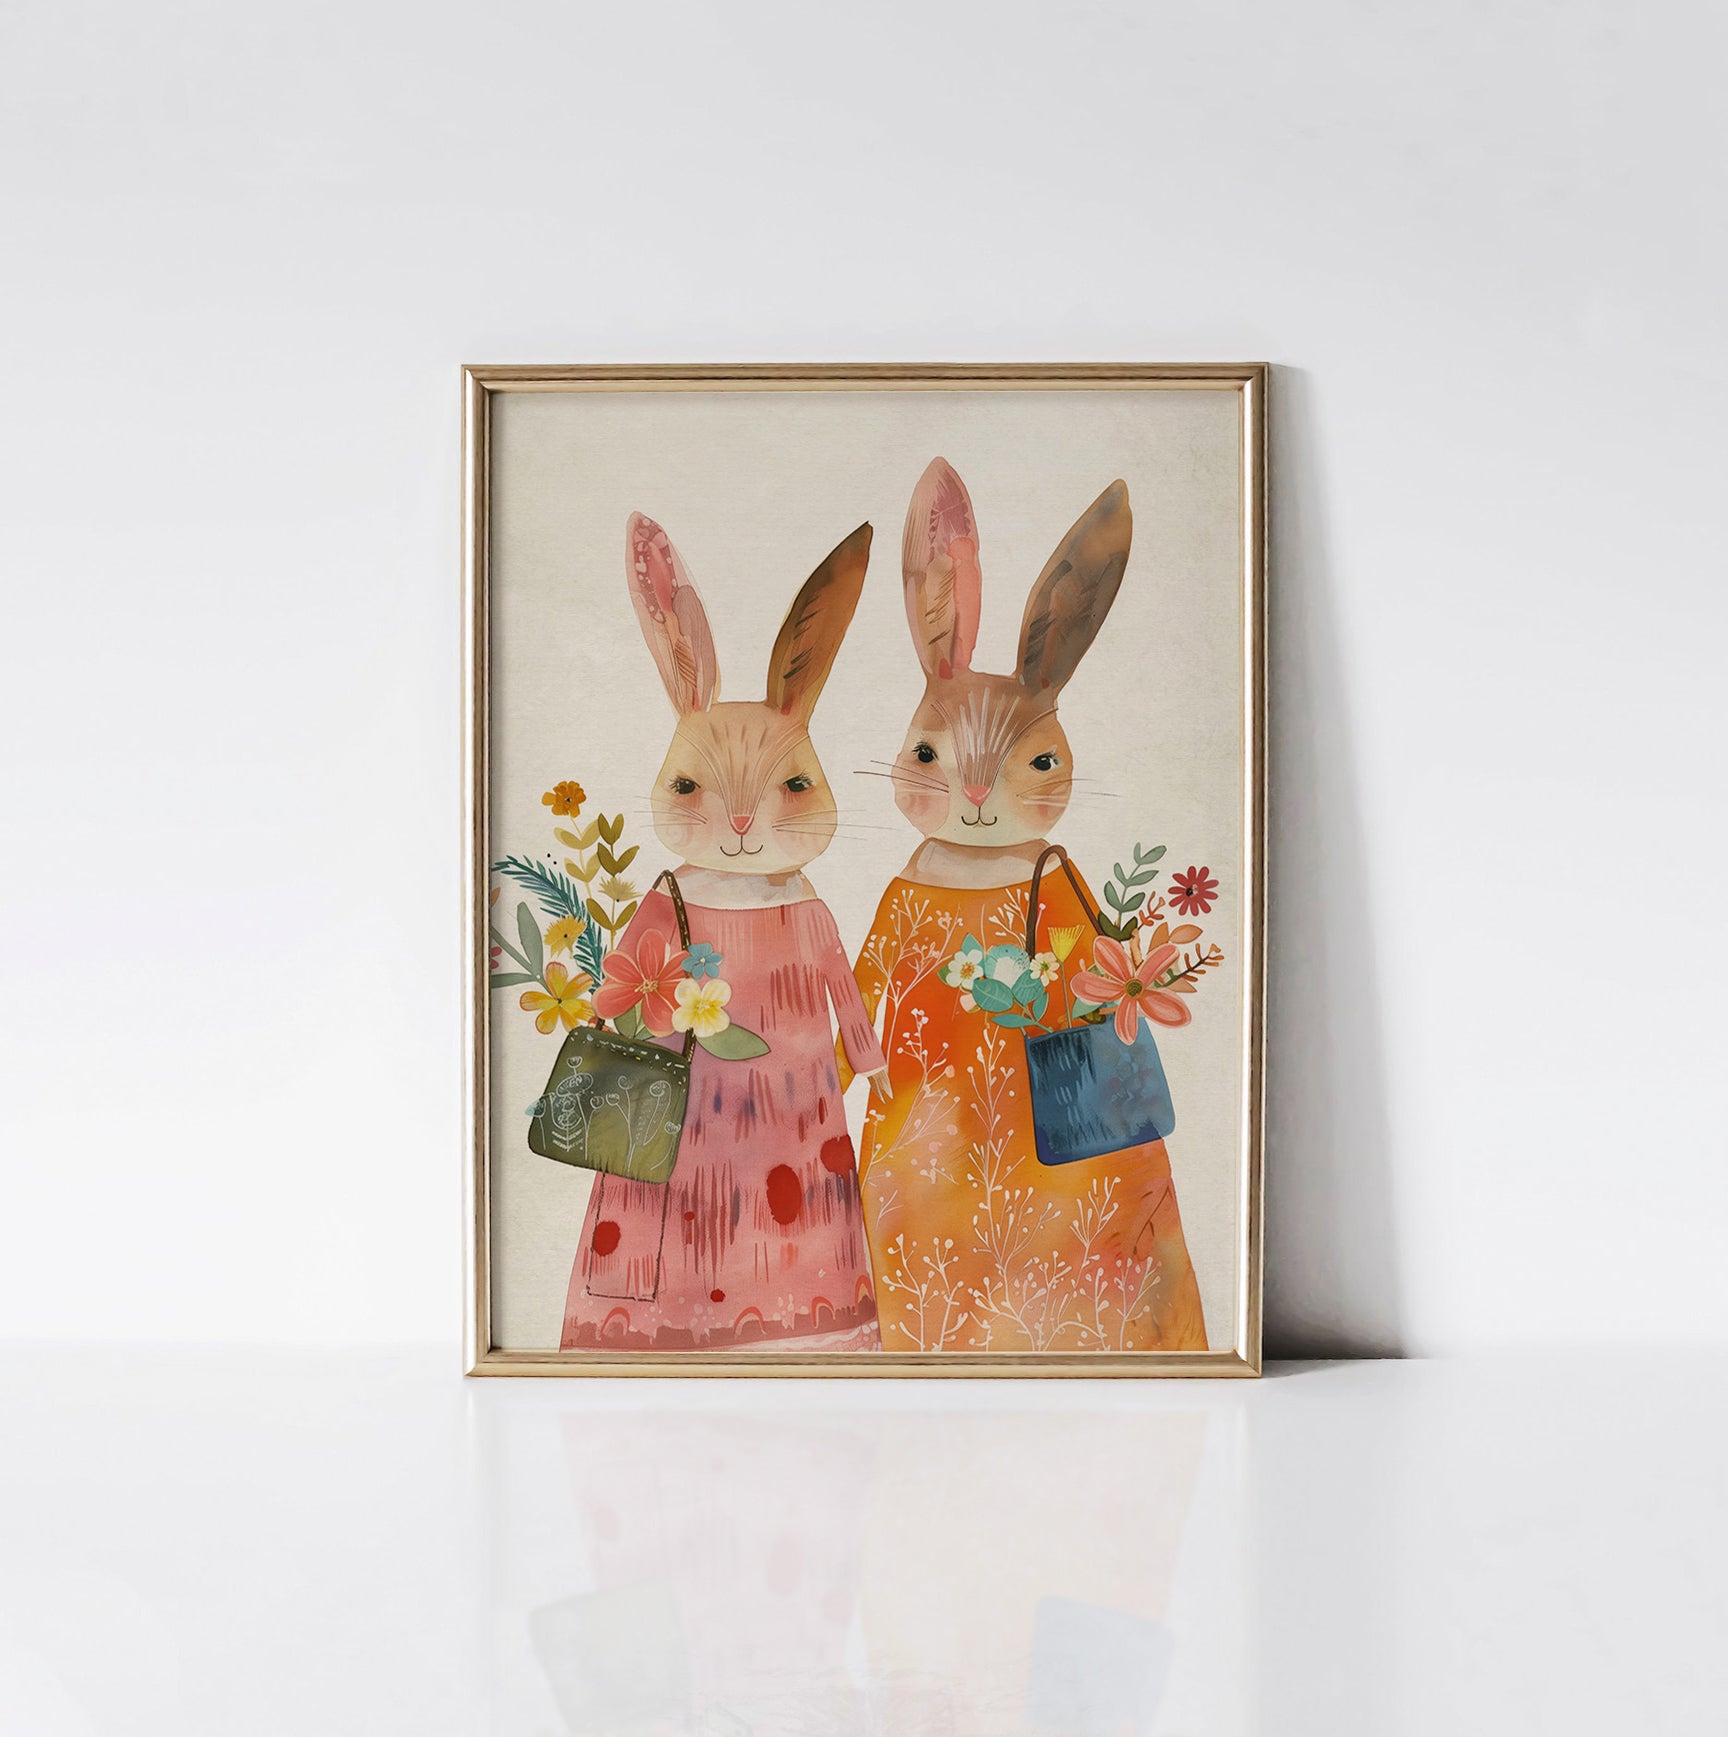 Floral Bunny Friends Art Print from Timberlea Interiors Kids Art Print Collection displayed in a gold frame, showcasing two charming bunnies with flower-filled bags and vibrant floral accents.